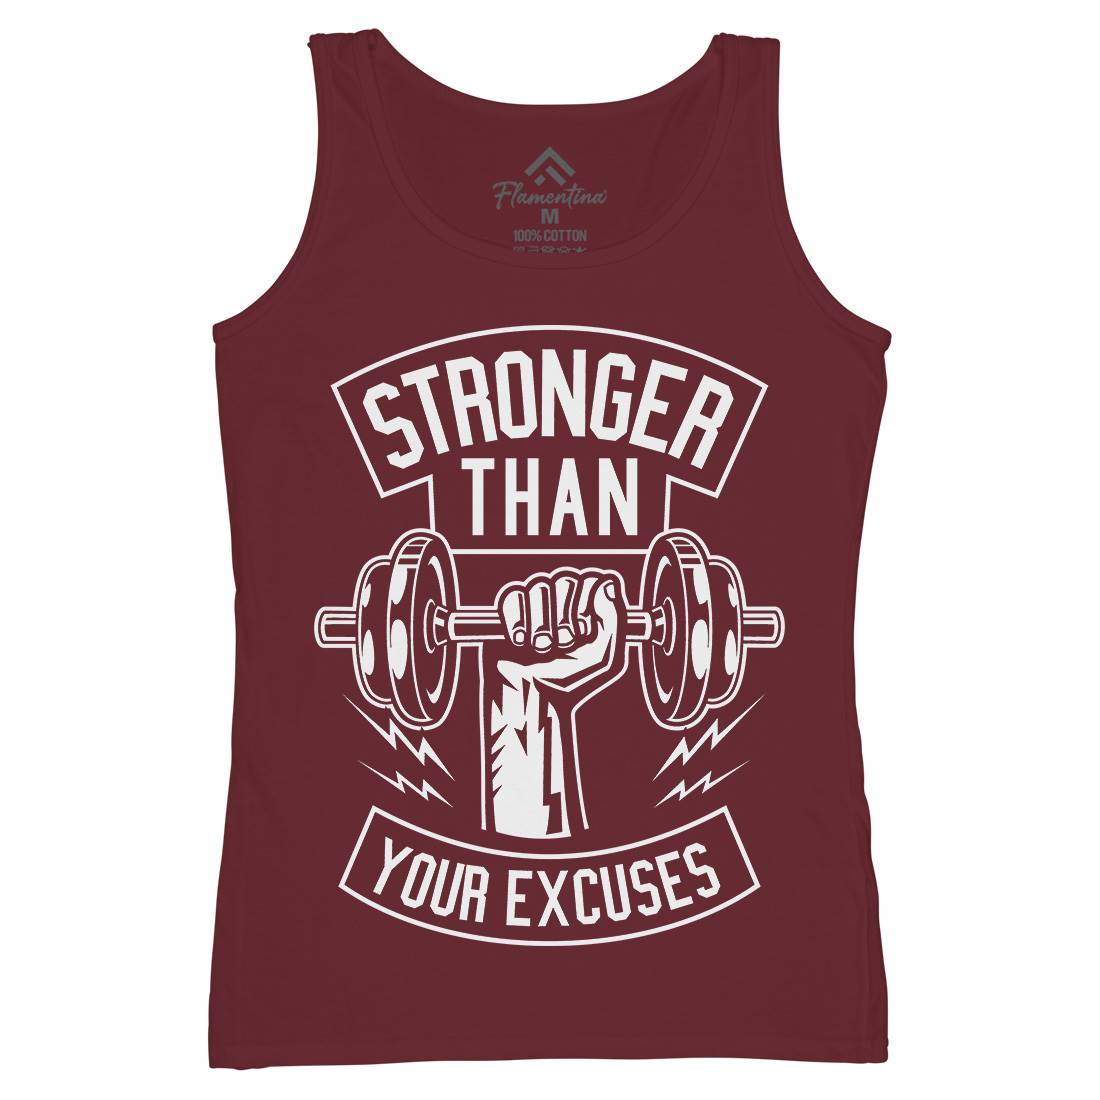 Stronger Than Your Excuses Womens Organic Tank Top Vest Gym B644